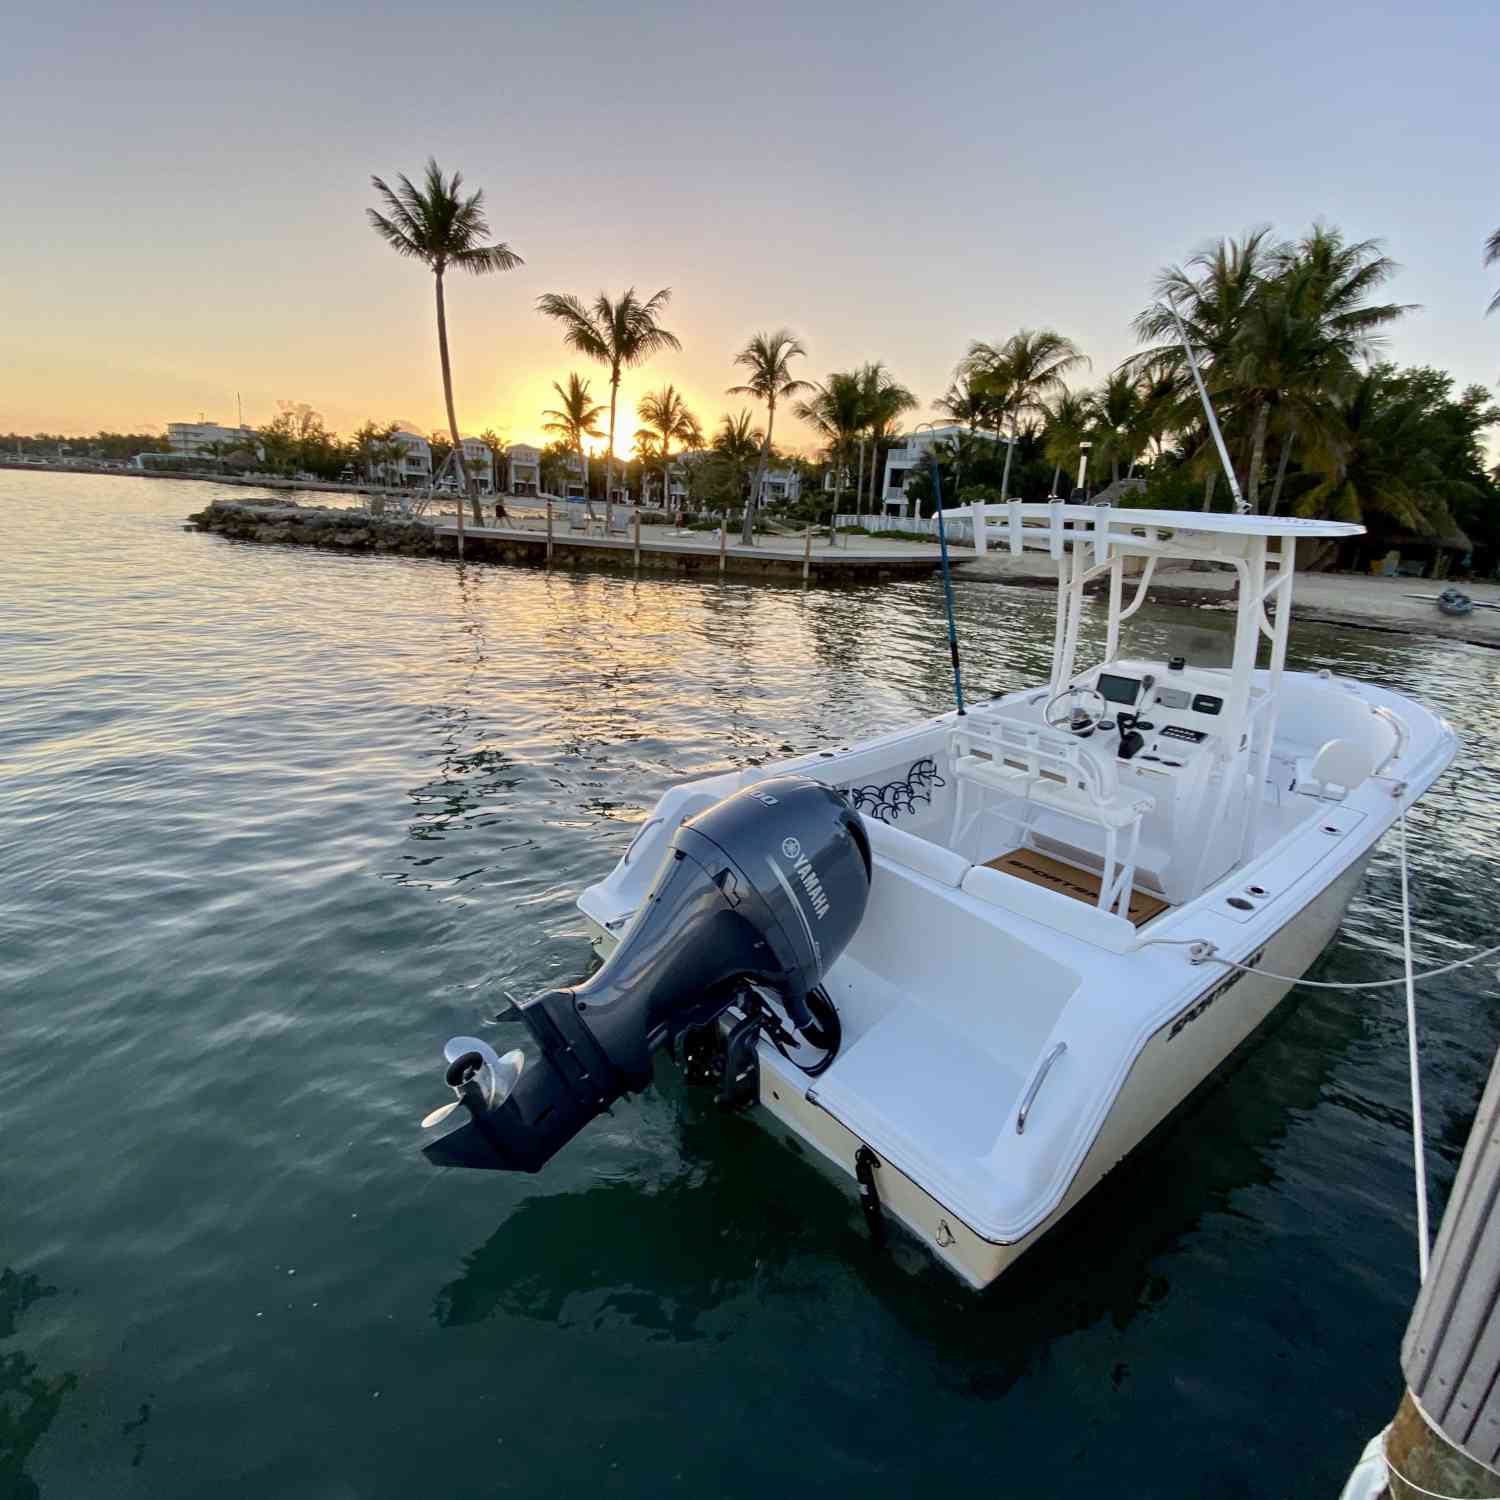 Title: No worries - On board their Sportsman Heritage 231 Center Console - Location: Keys. Participating in the Photo Contest #SportsmanJune2021